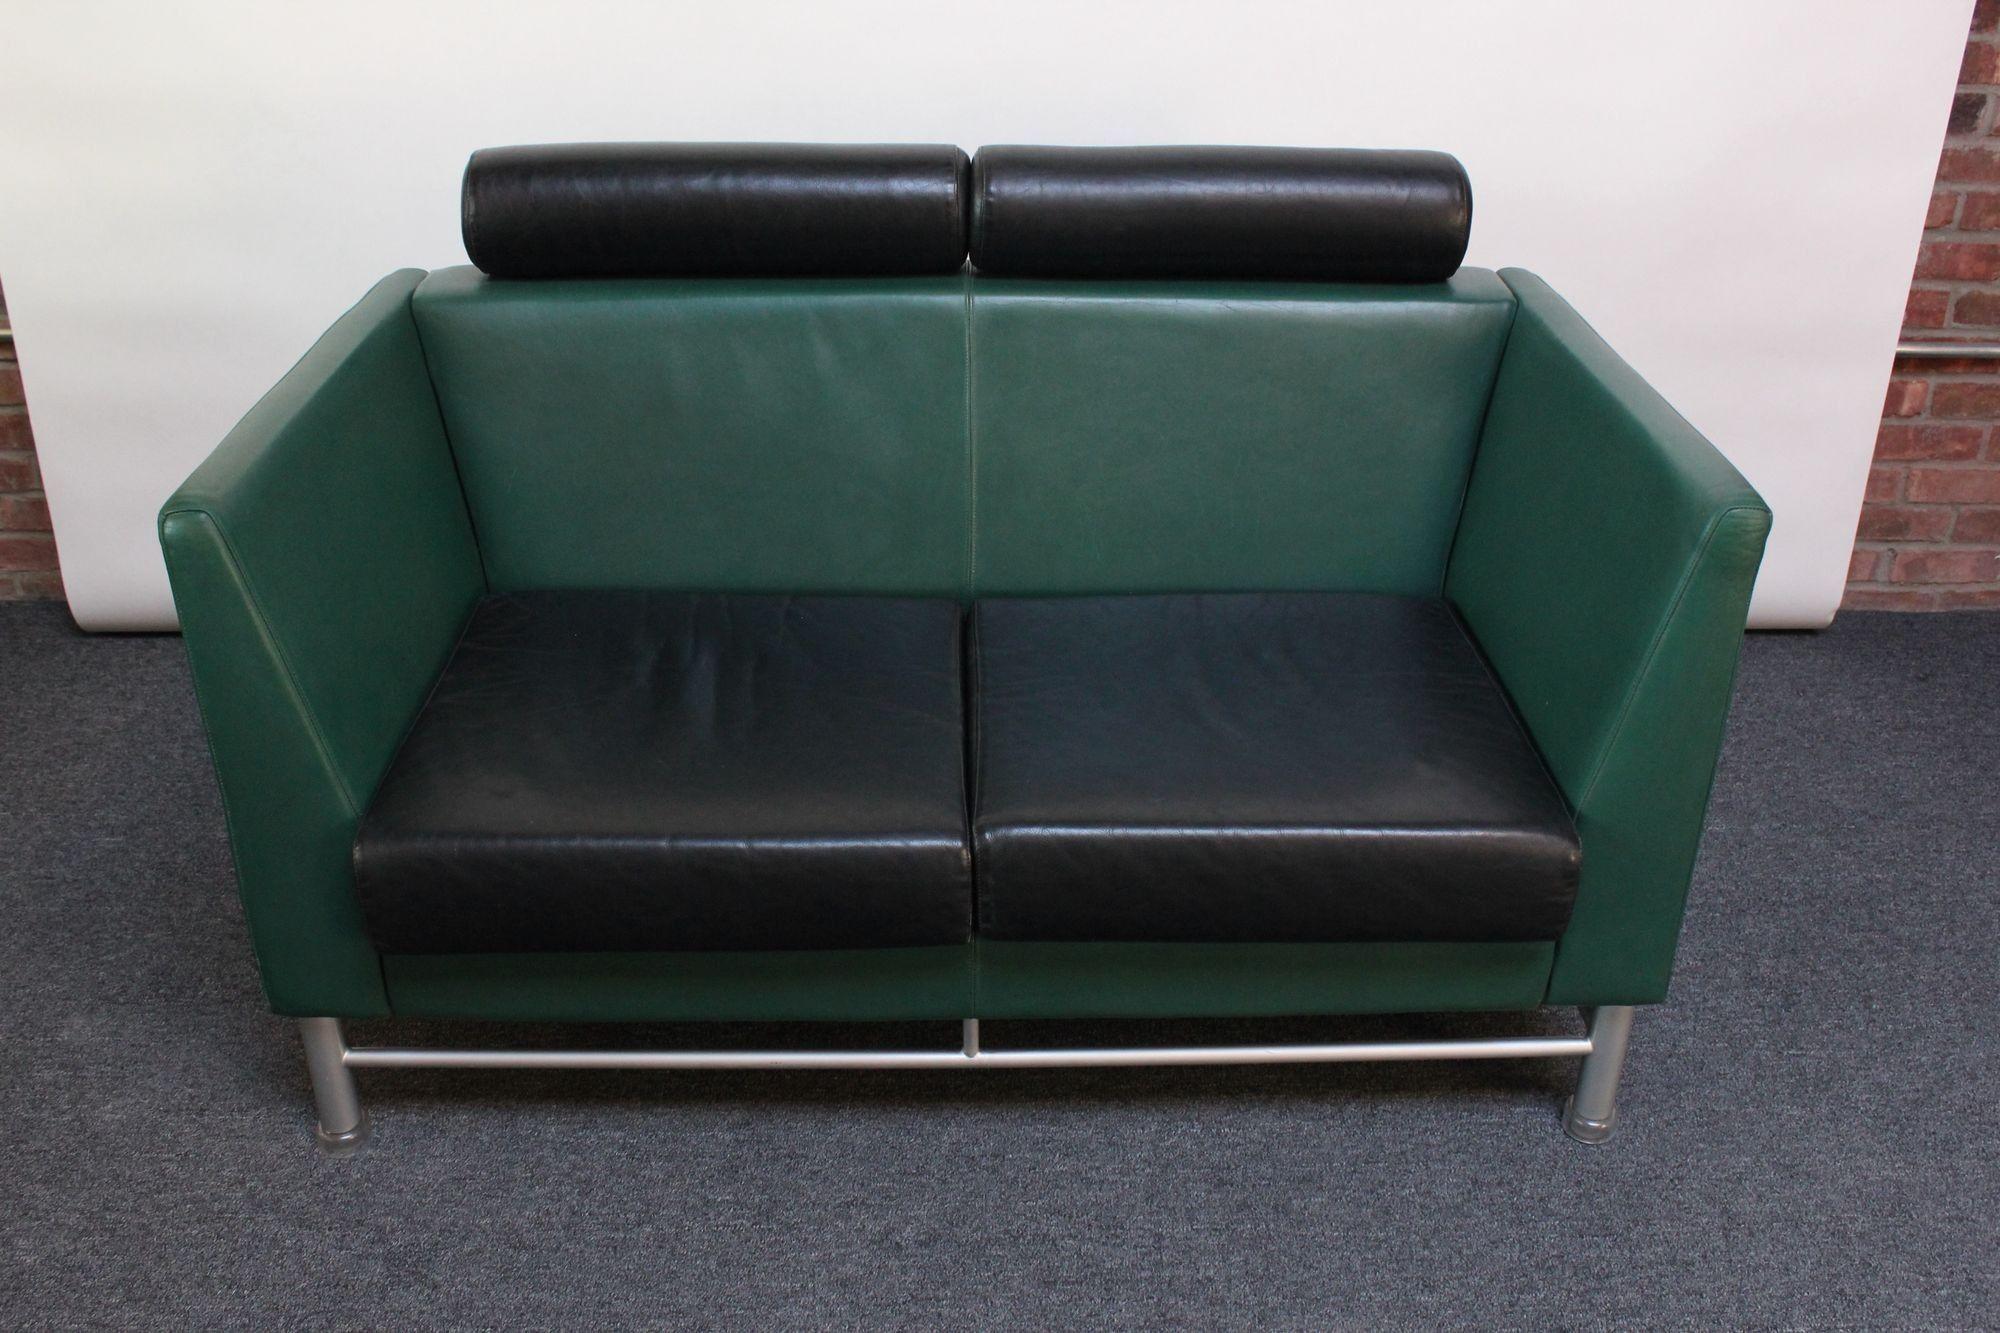 Memphis-Style/Postmodern two-seat sofa designed in 1983 by Ettore Sottsass for Knoll for the 